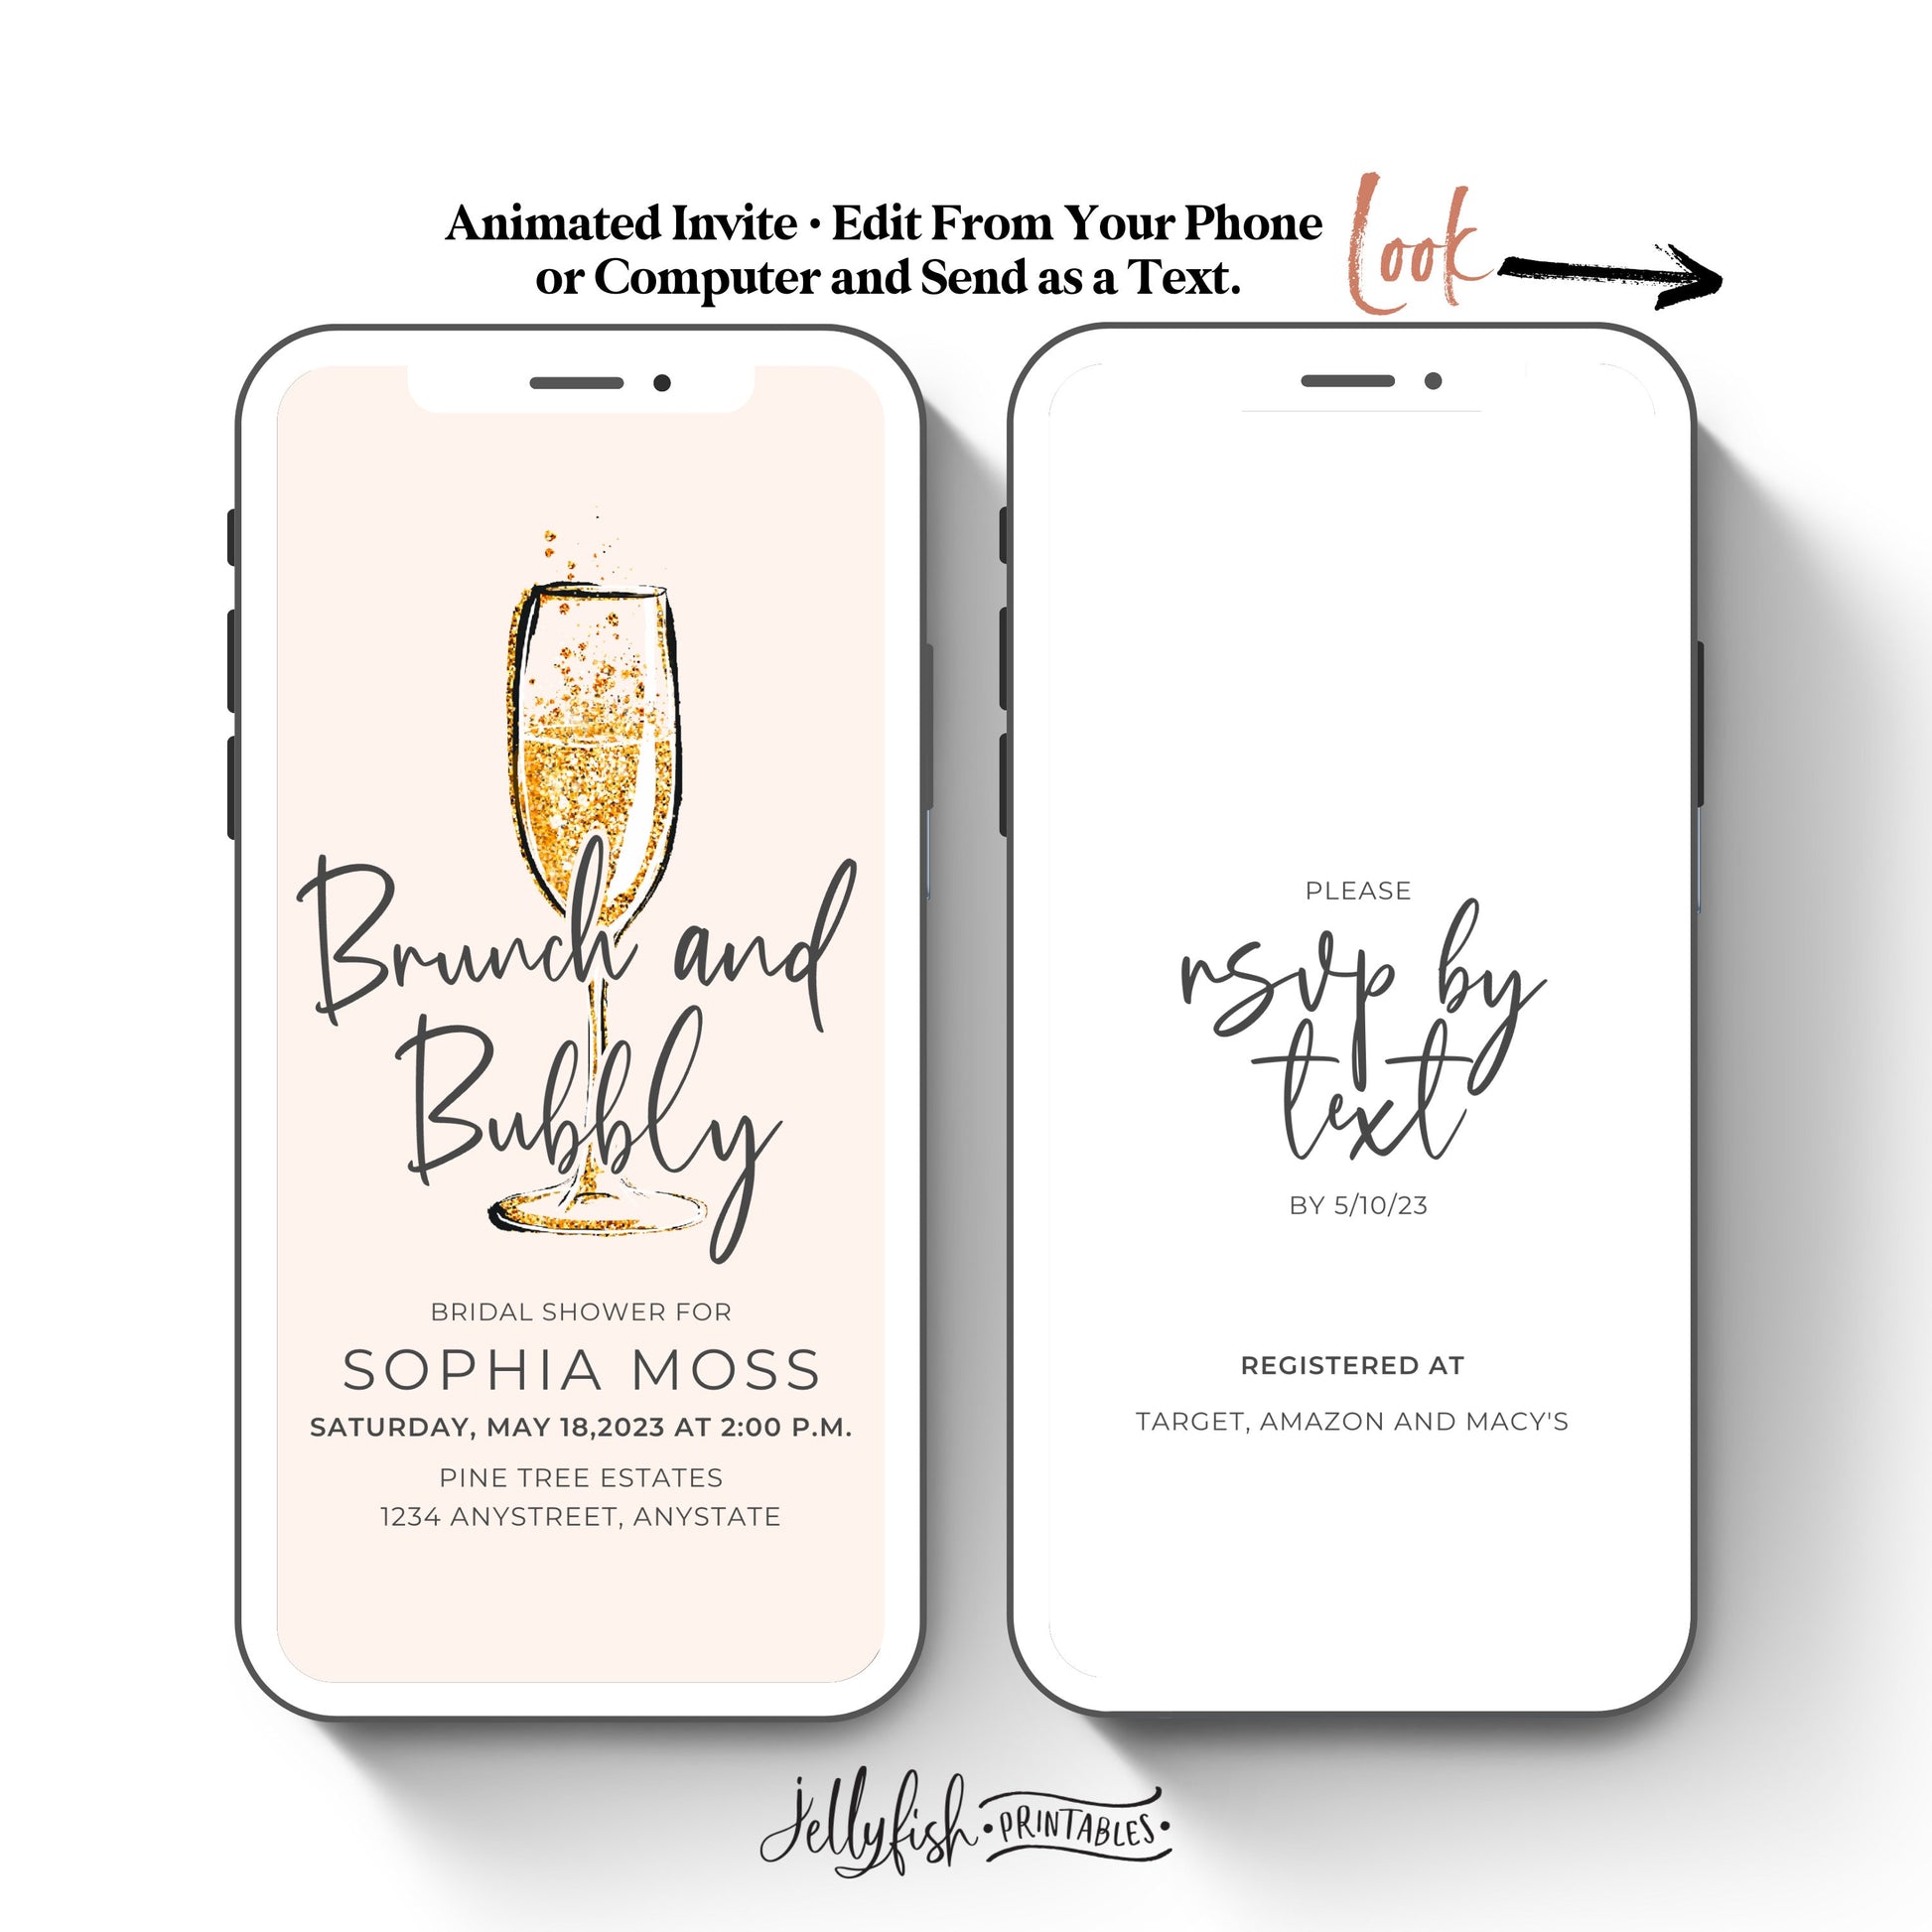 Brunch and Bubbly Bridal Video Invitation Canva Template Send Today!